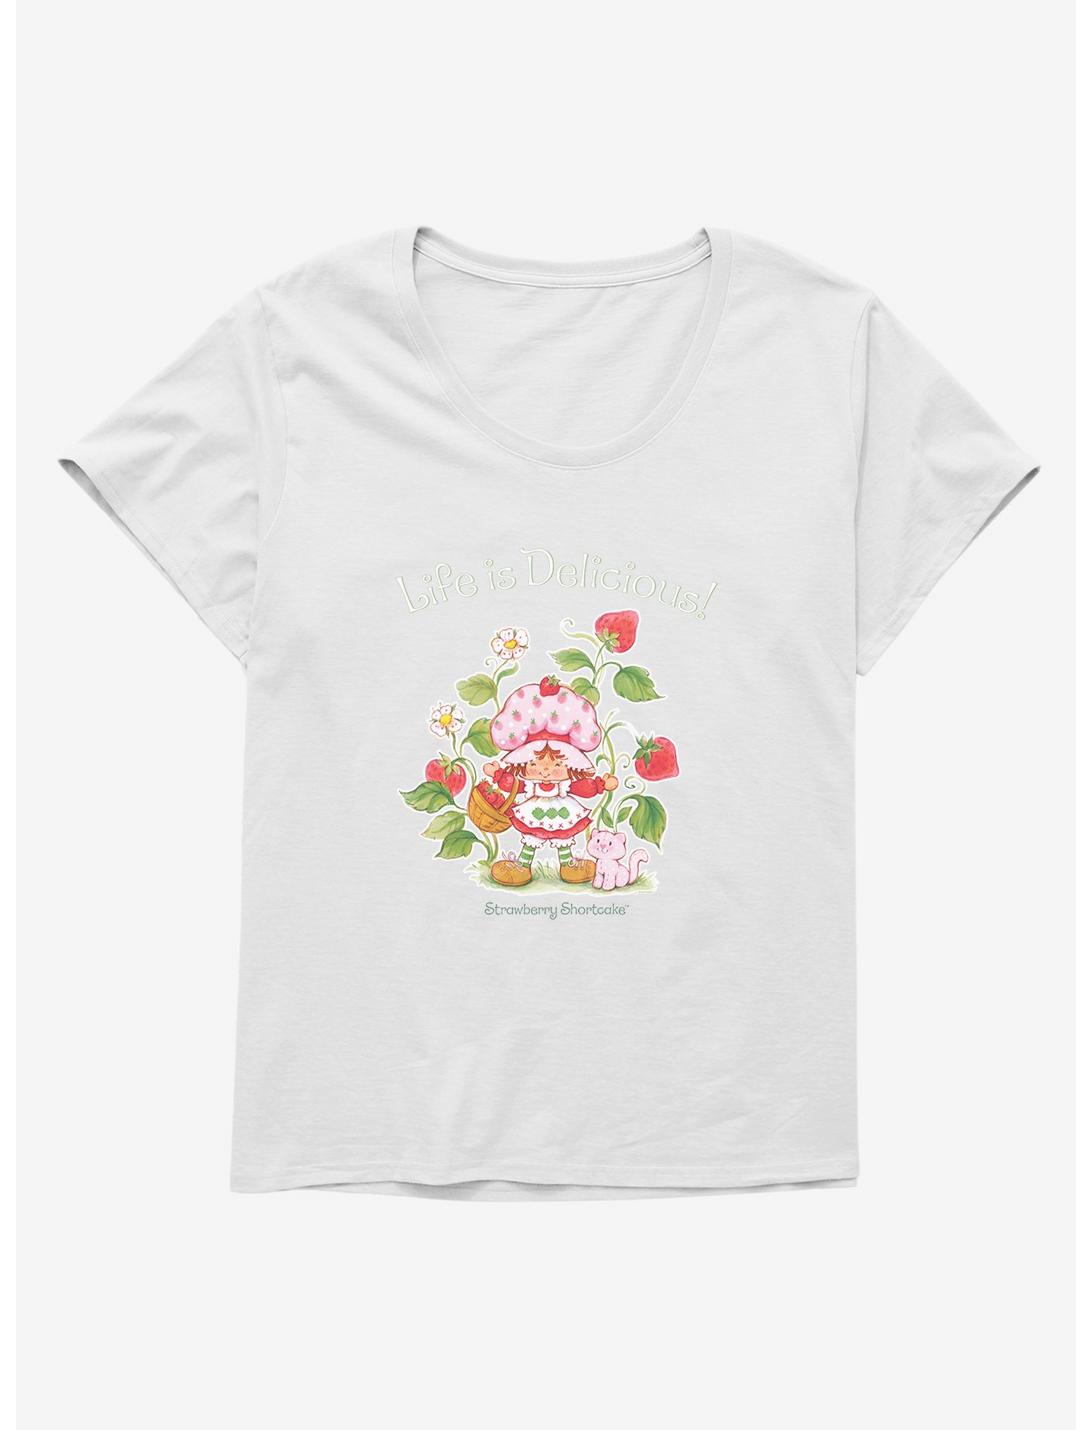 Strawberry Shortcake Life Is Delicious! Womens T-Shirt Plus Size, WHITE, hi-res